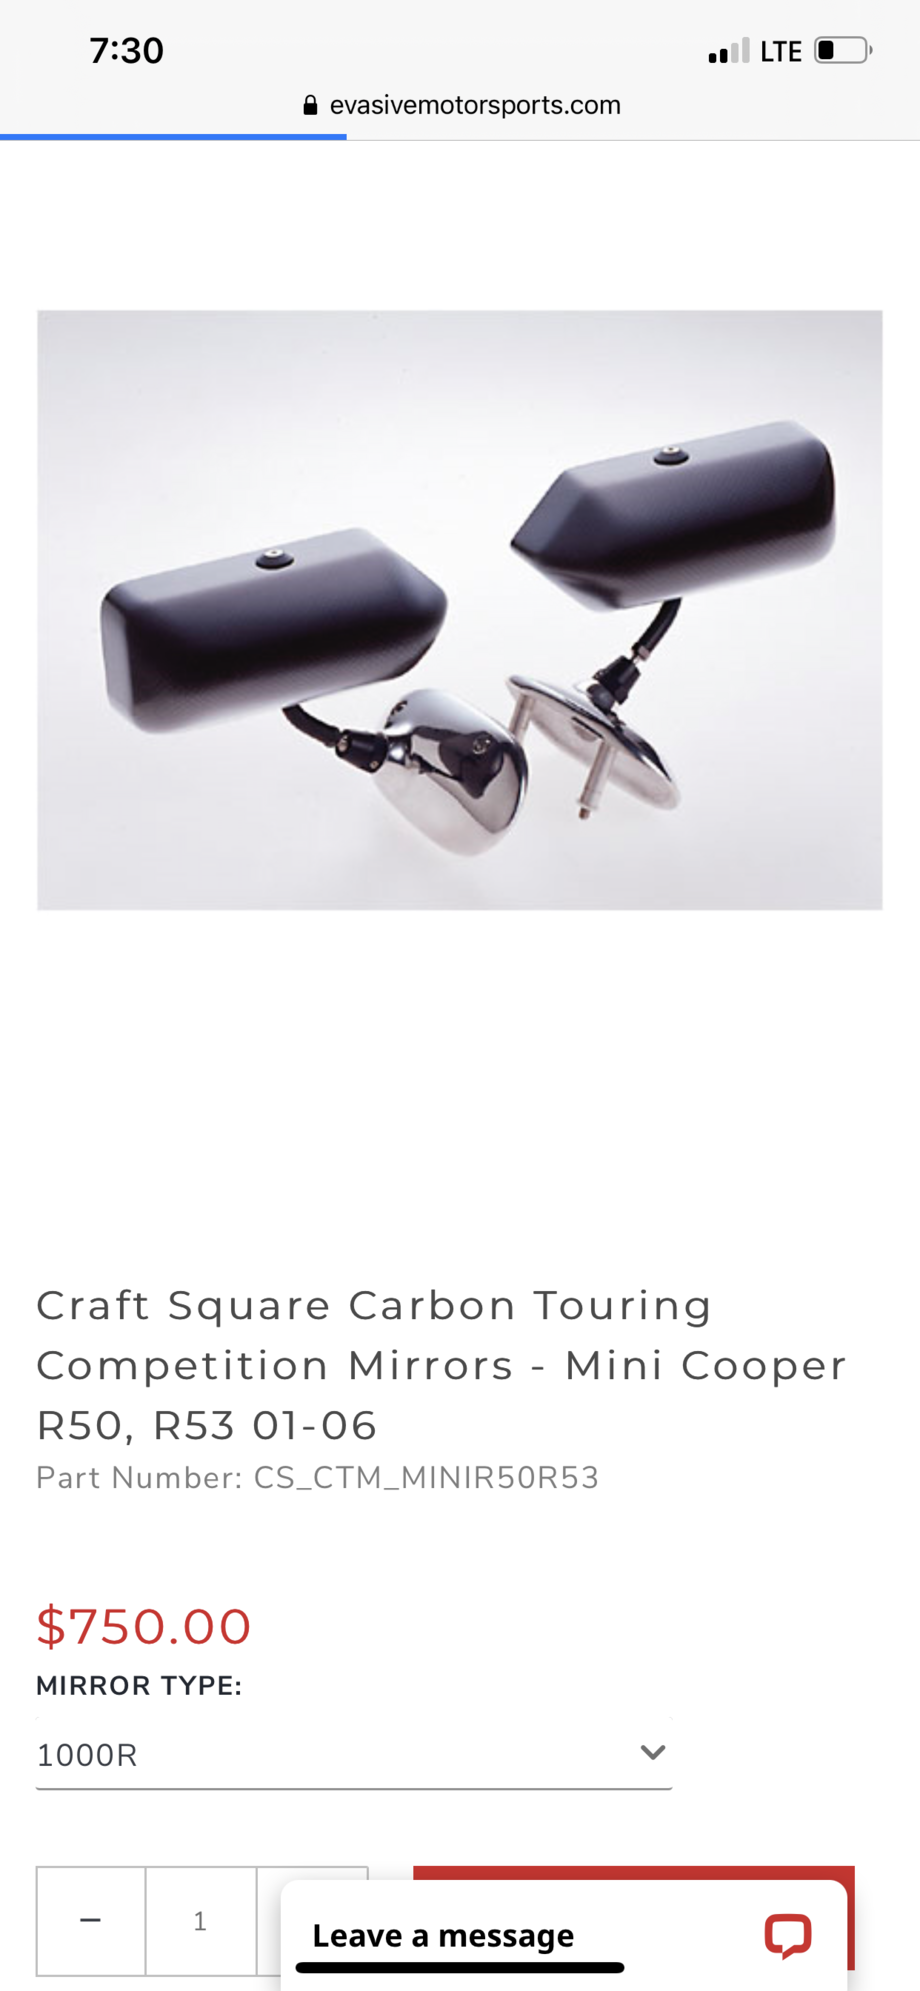 Evasive Motorsports: Craft Square Carbon Touring Competition